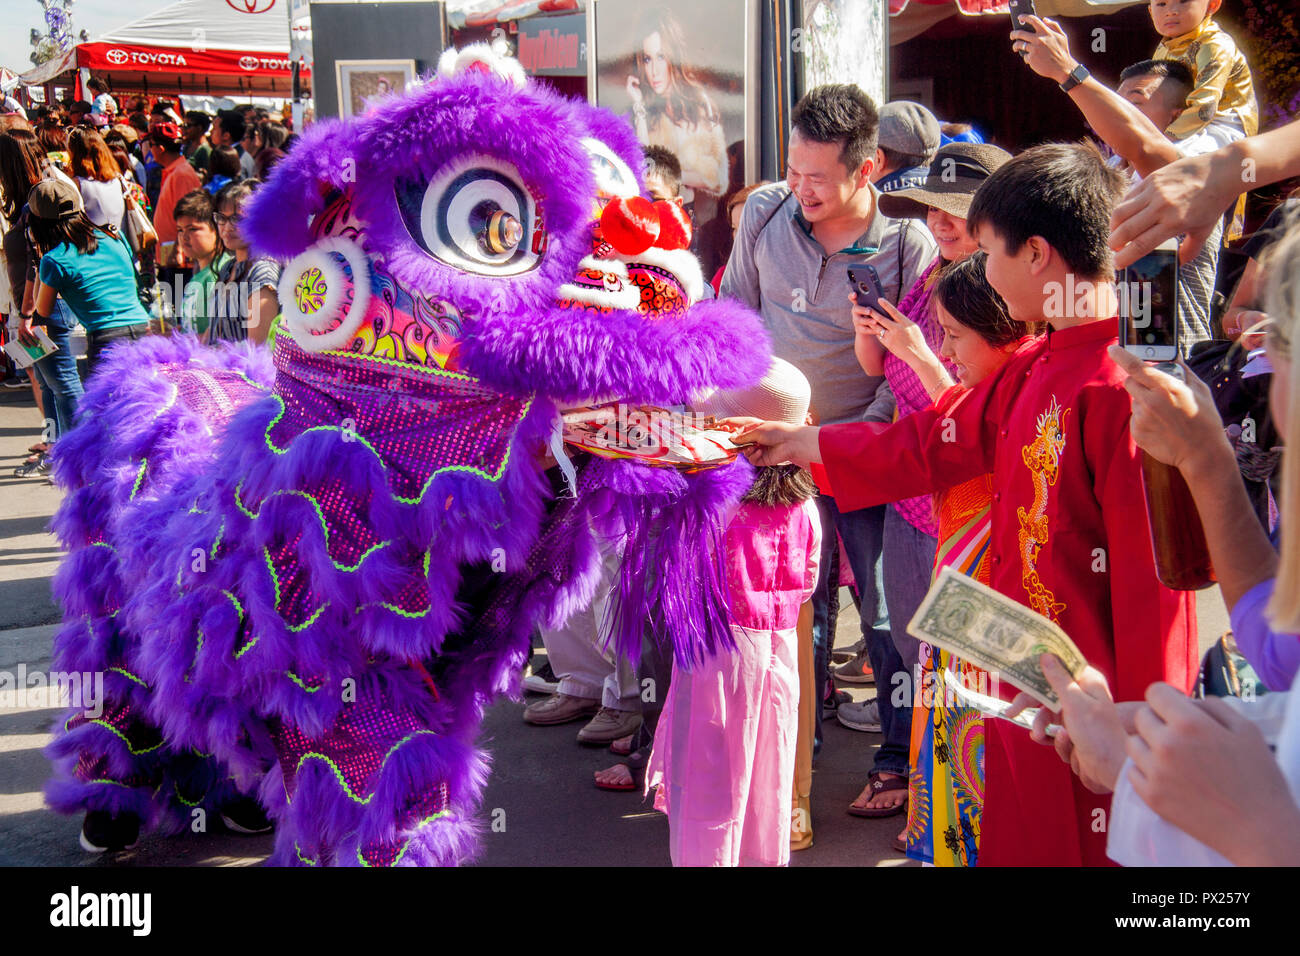 A purple pantomime lion gets placated with money at an Asian American cultural festival in Costa Mesa, CA. Stock Photo